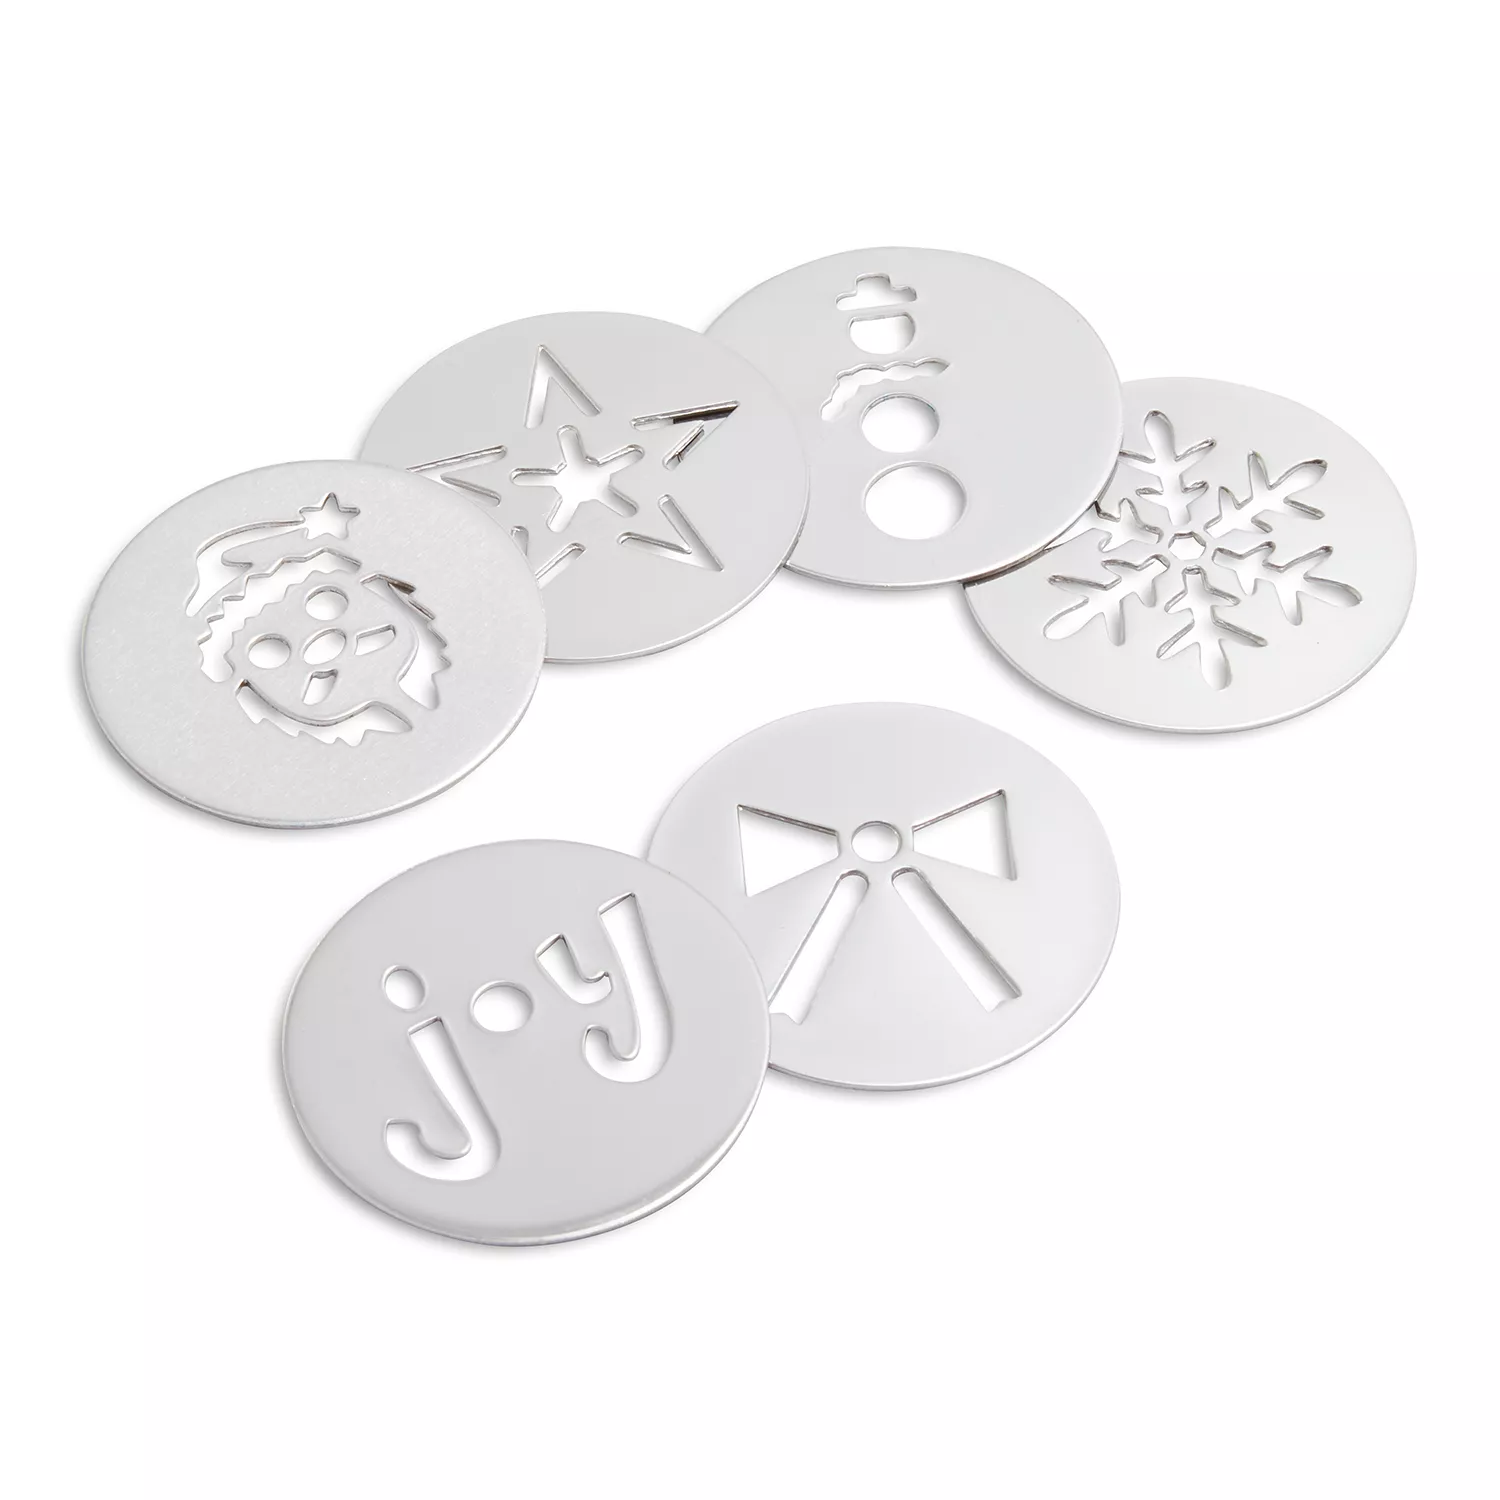 OXO Good Grips Cookie Press Holiday Disk Set  